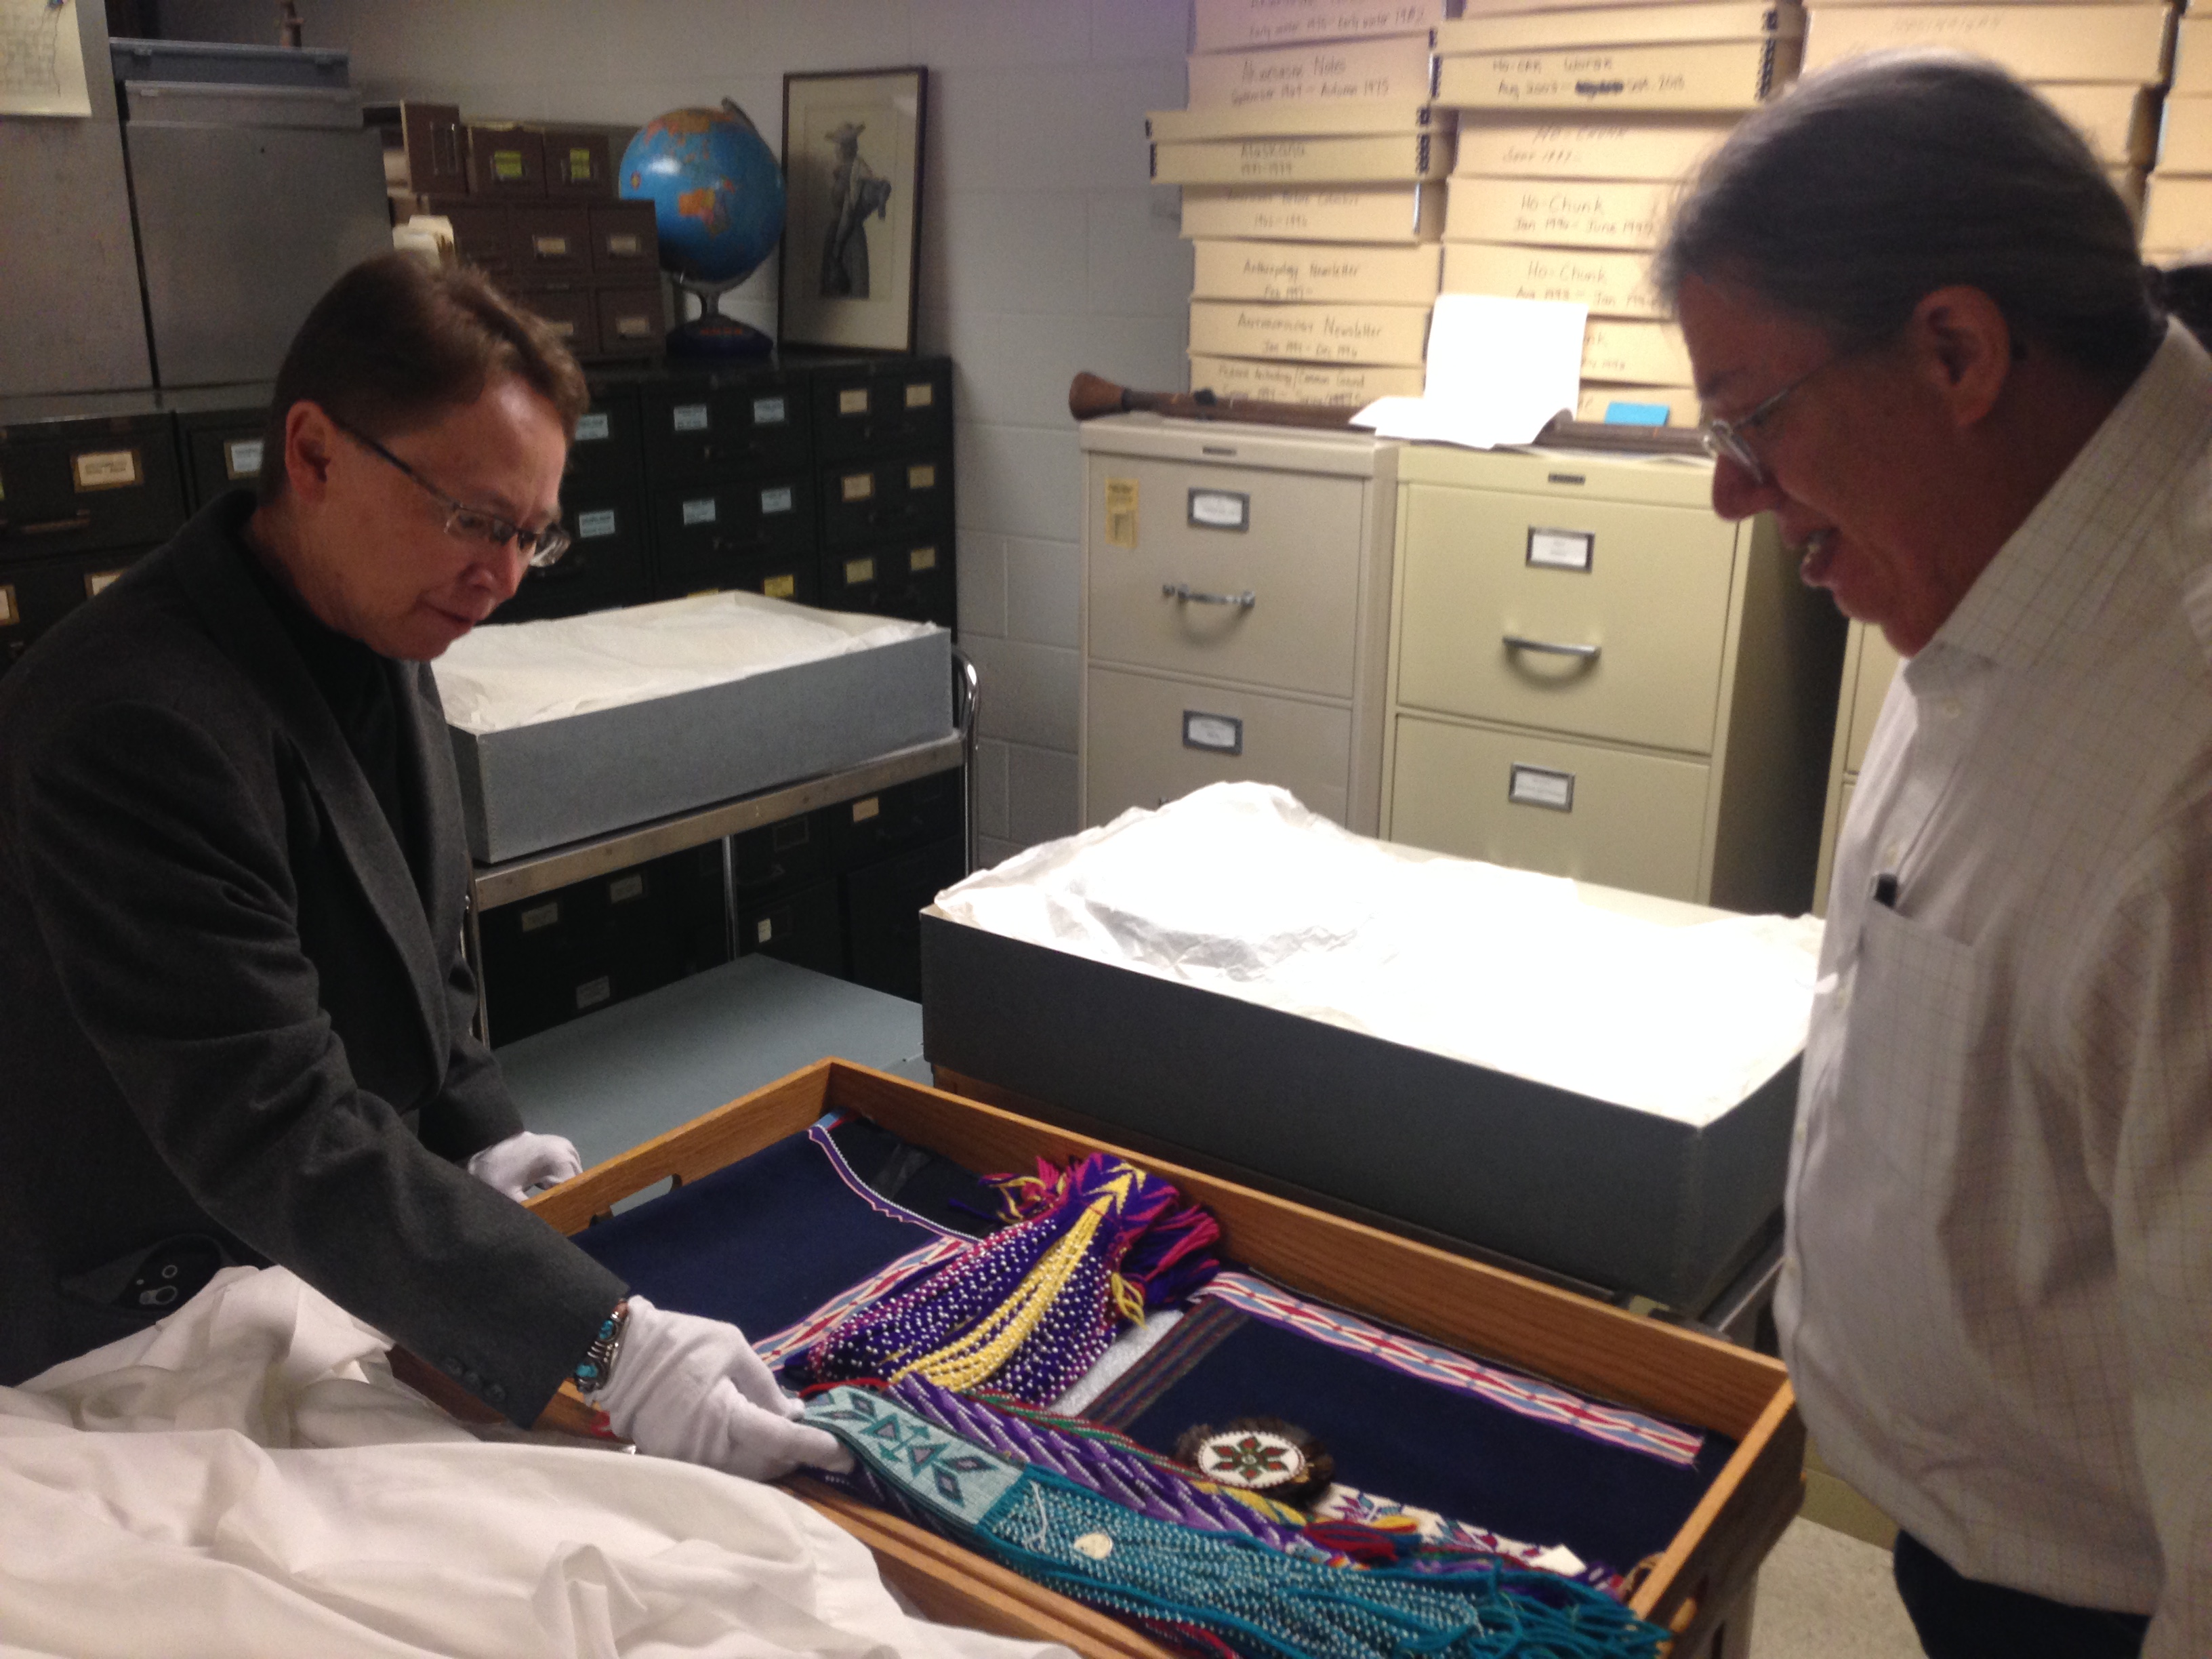 Representatives of The Osage Nation review potential NAGPRA collections